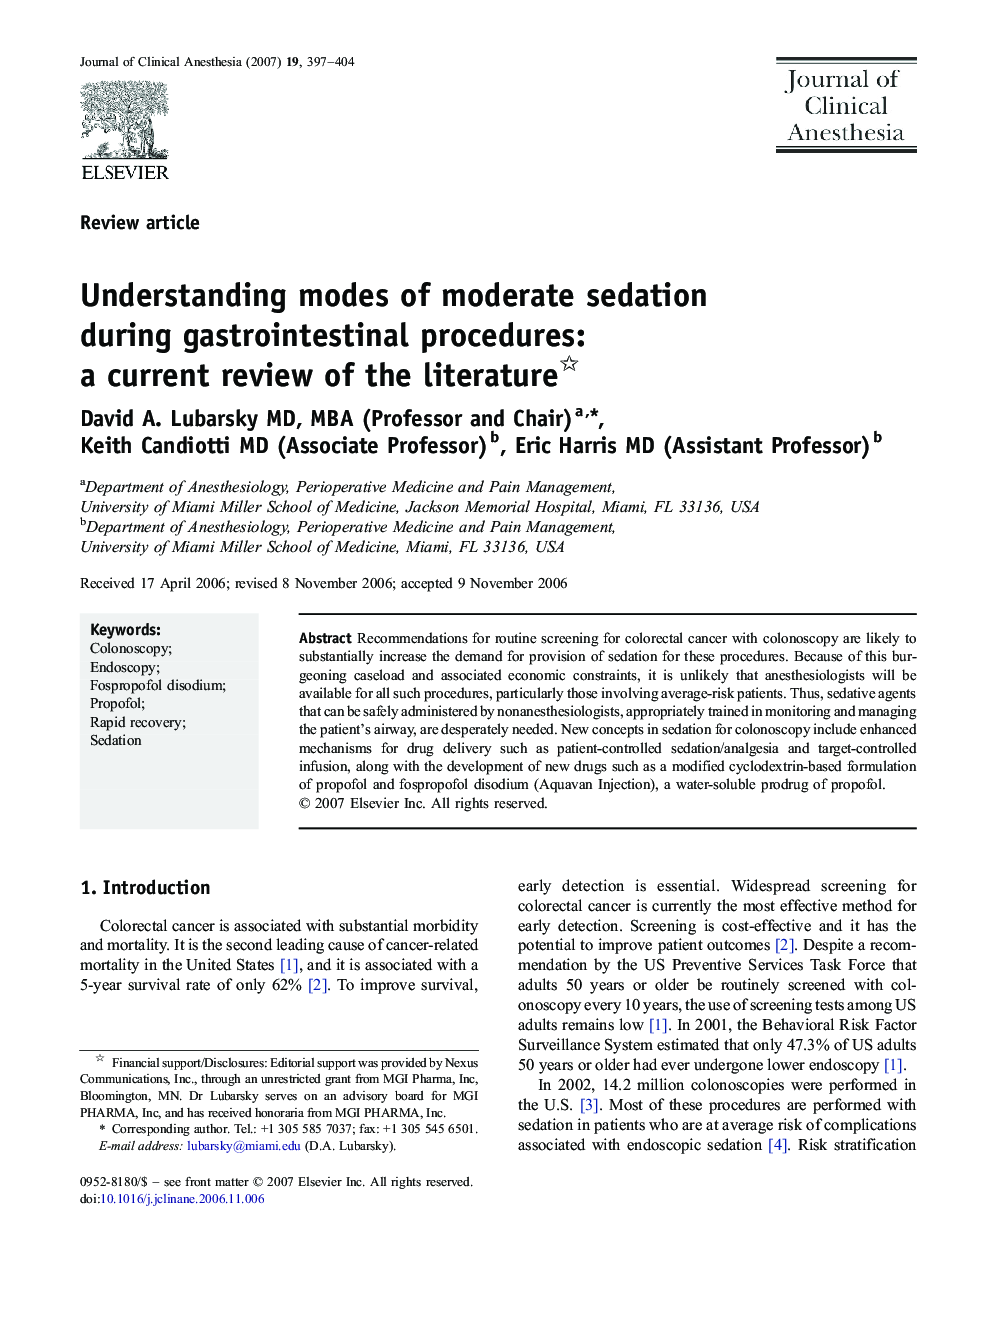 Understanding modes of moderate sedation during gastrointestinal procedures: a current review of the literature 